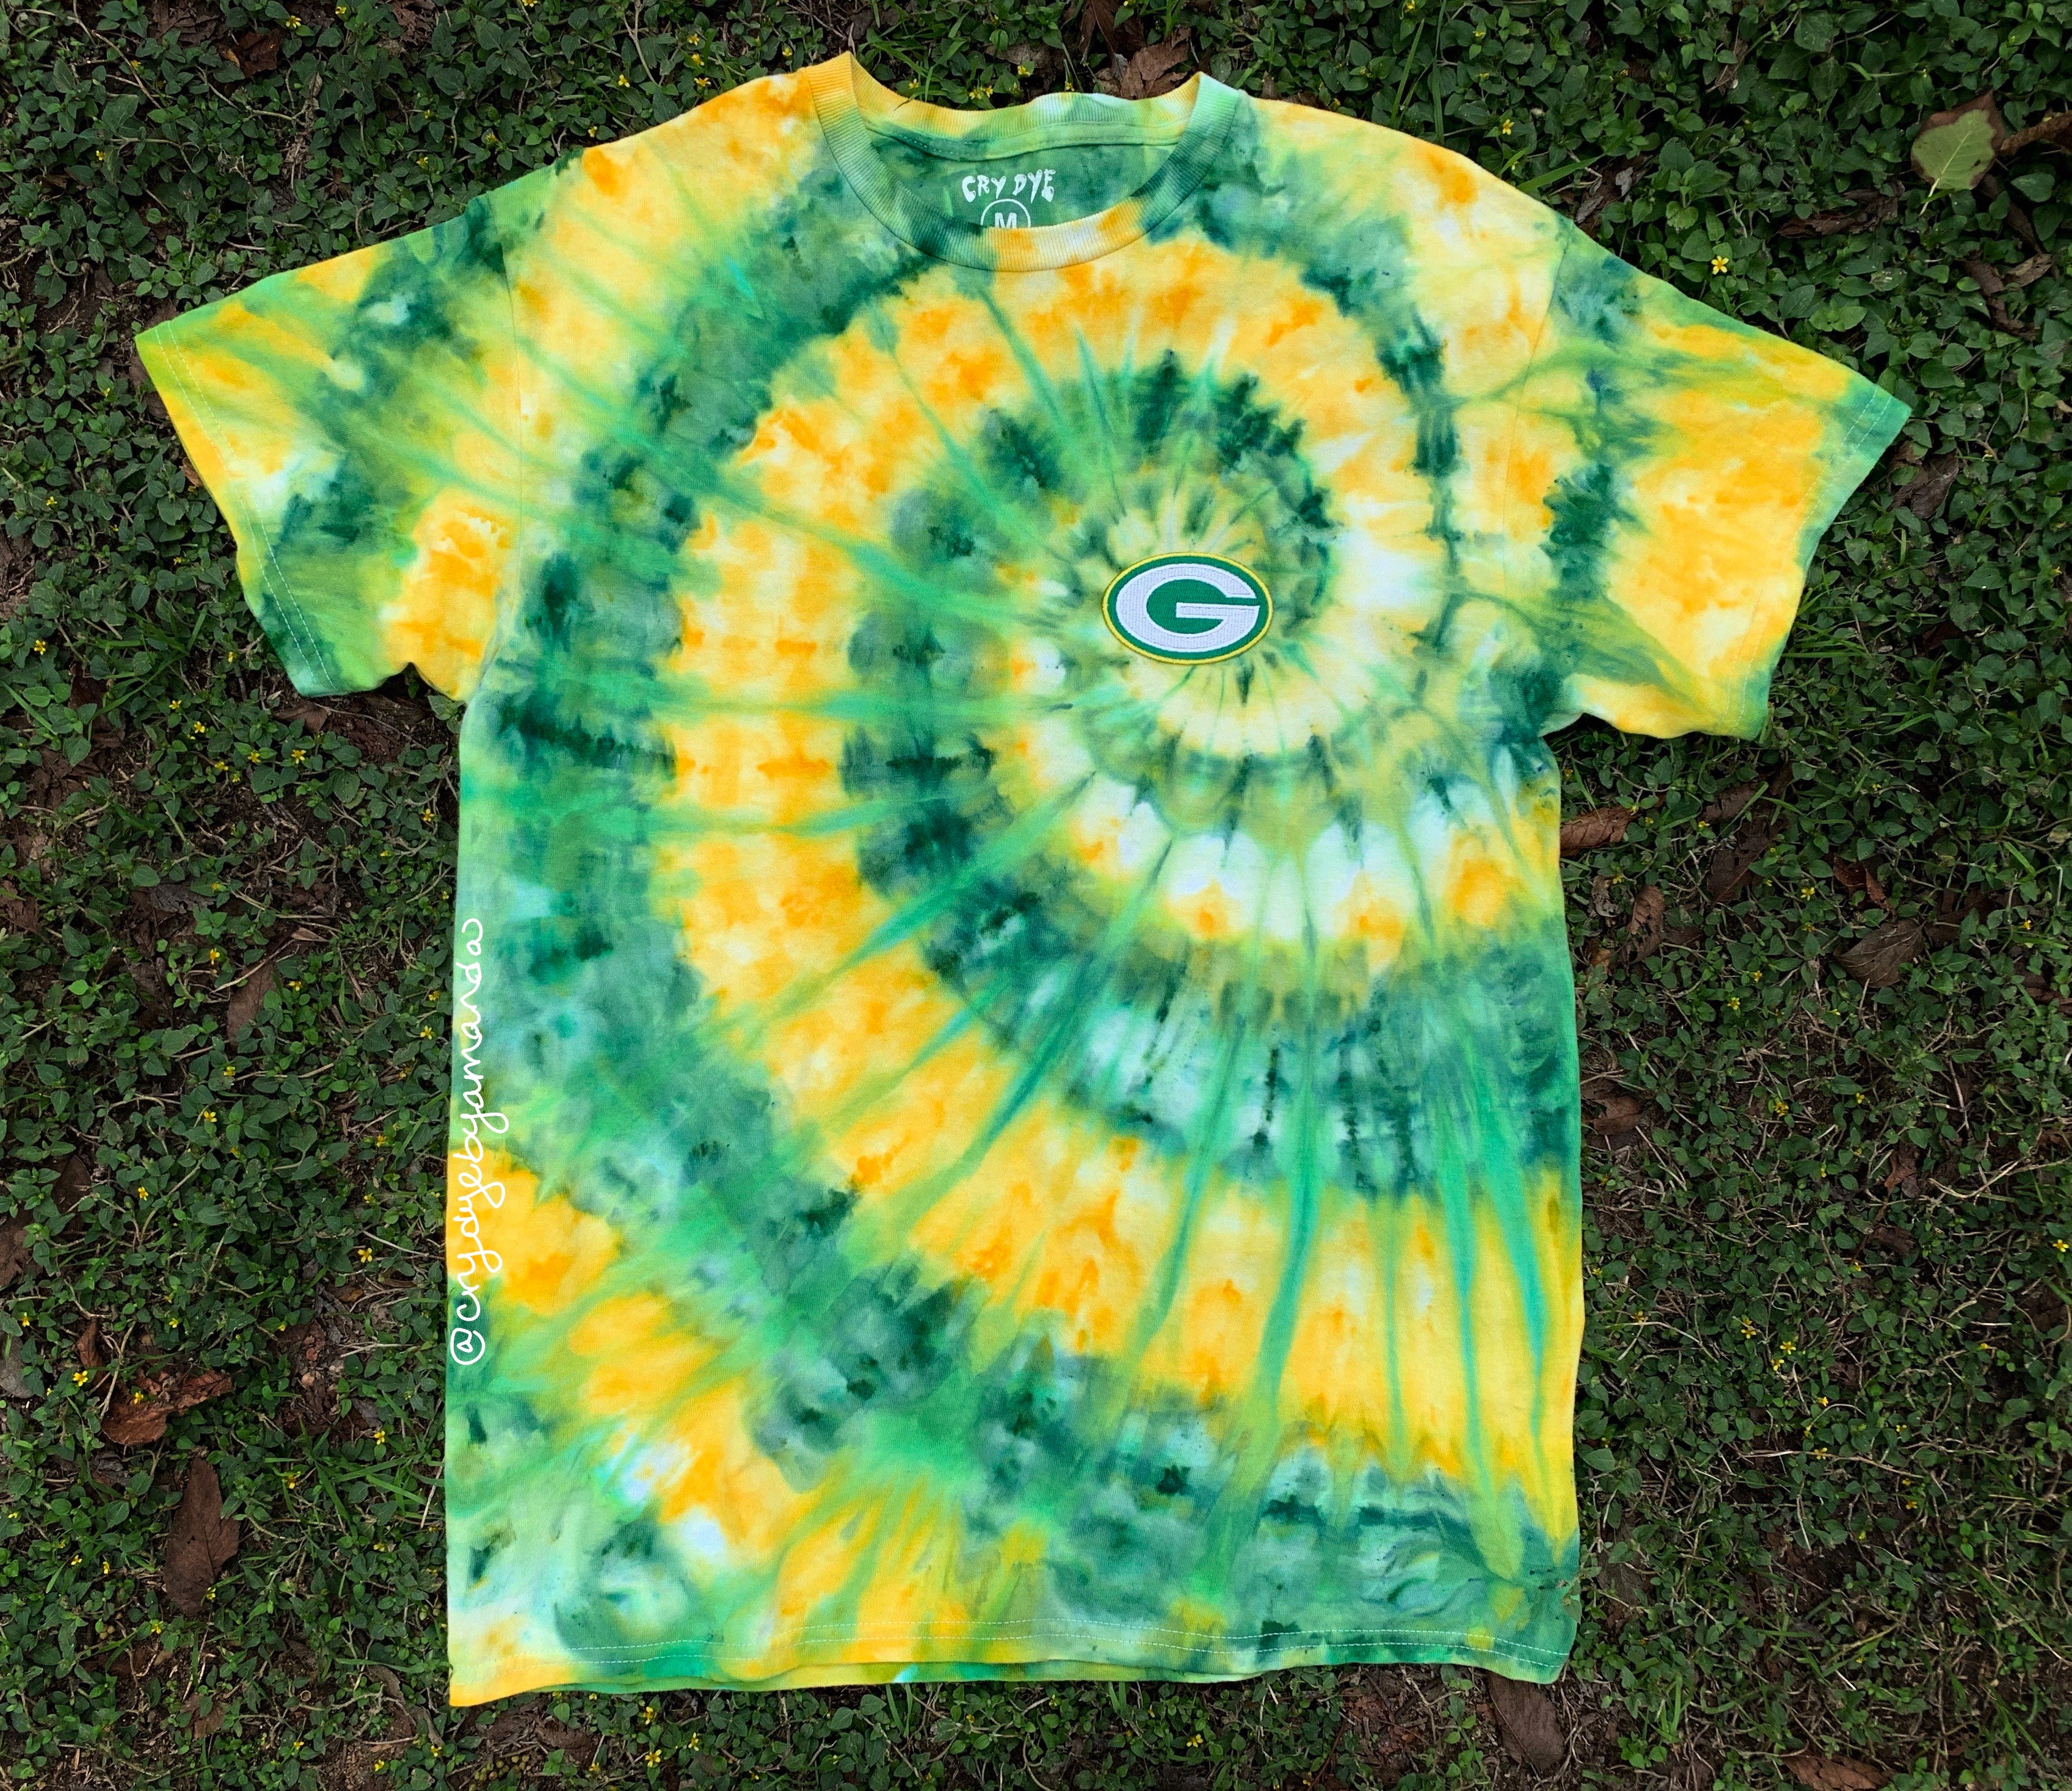 Green Bay Packers NFL FOOTBALL 2015 PLAYOFFS REVERSE TIE DYE Size